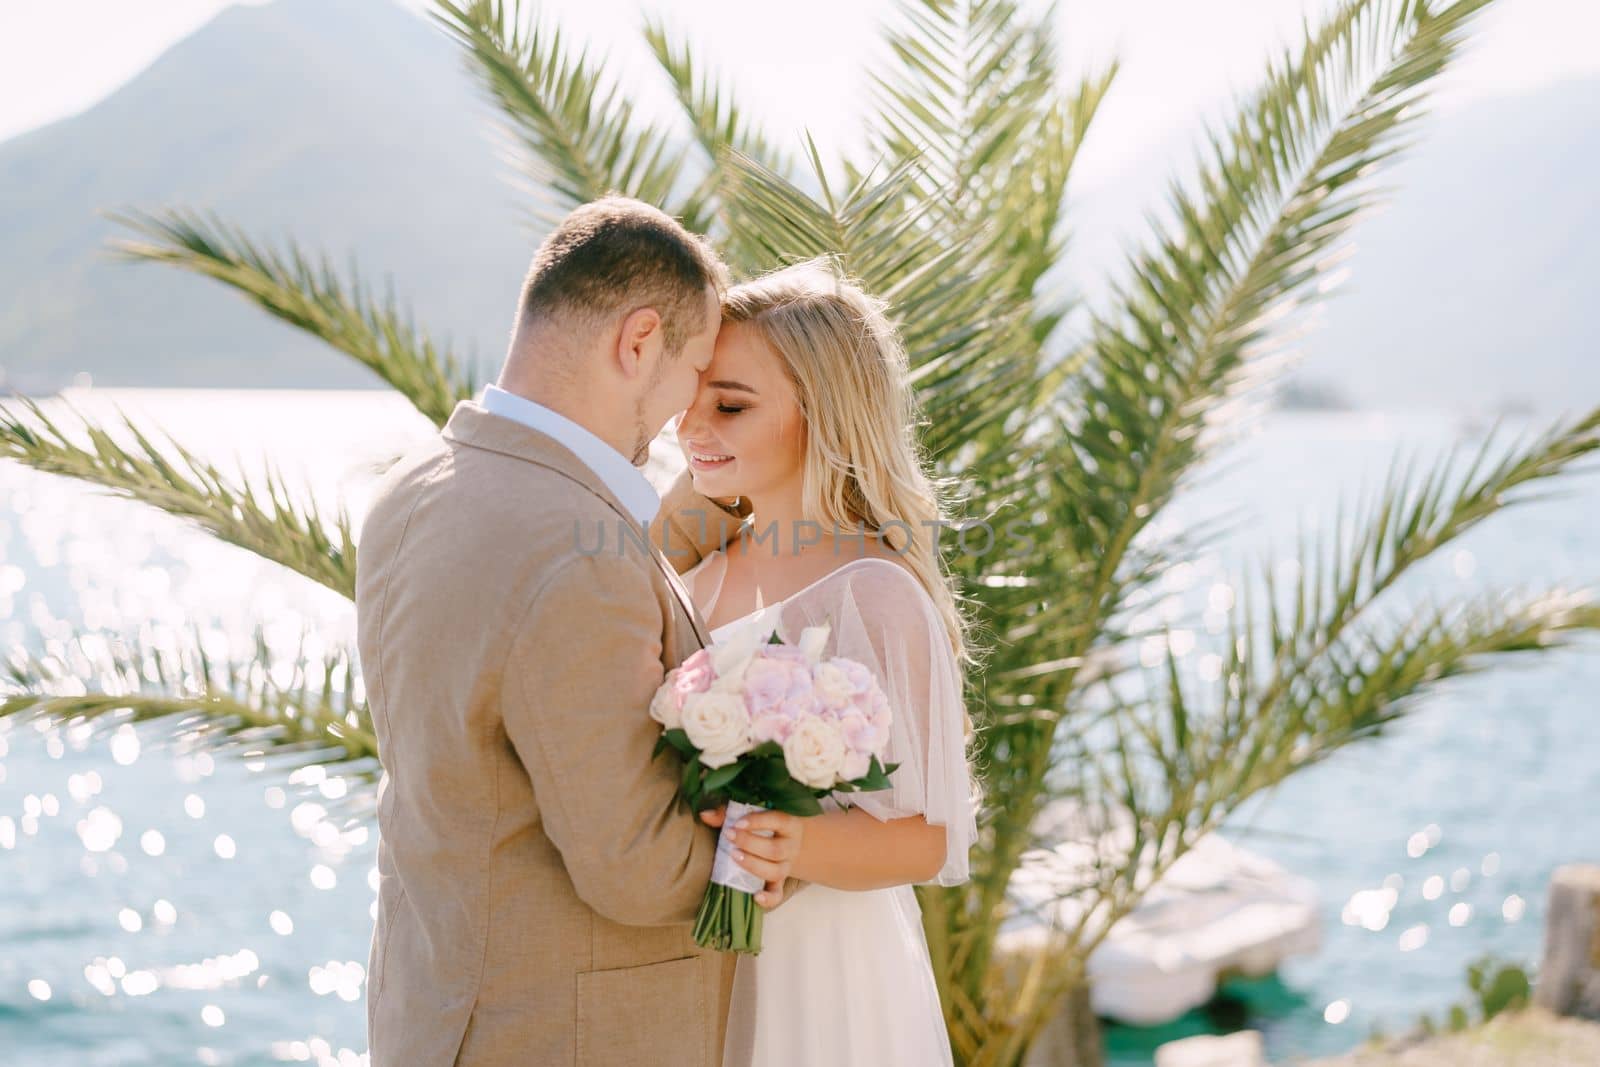 The groom and the smiling bride with a bouquet stand on the pier at the background of a palm tree and tenderly hug . High quality photo